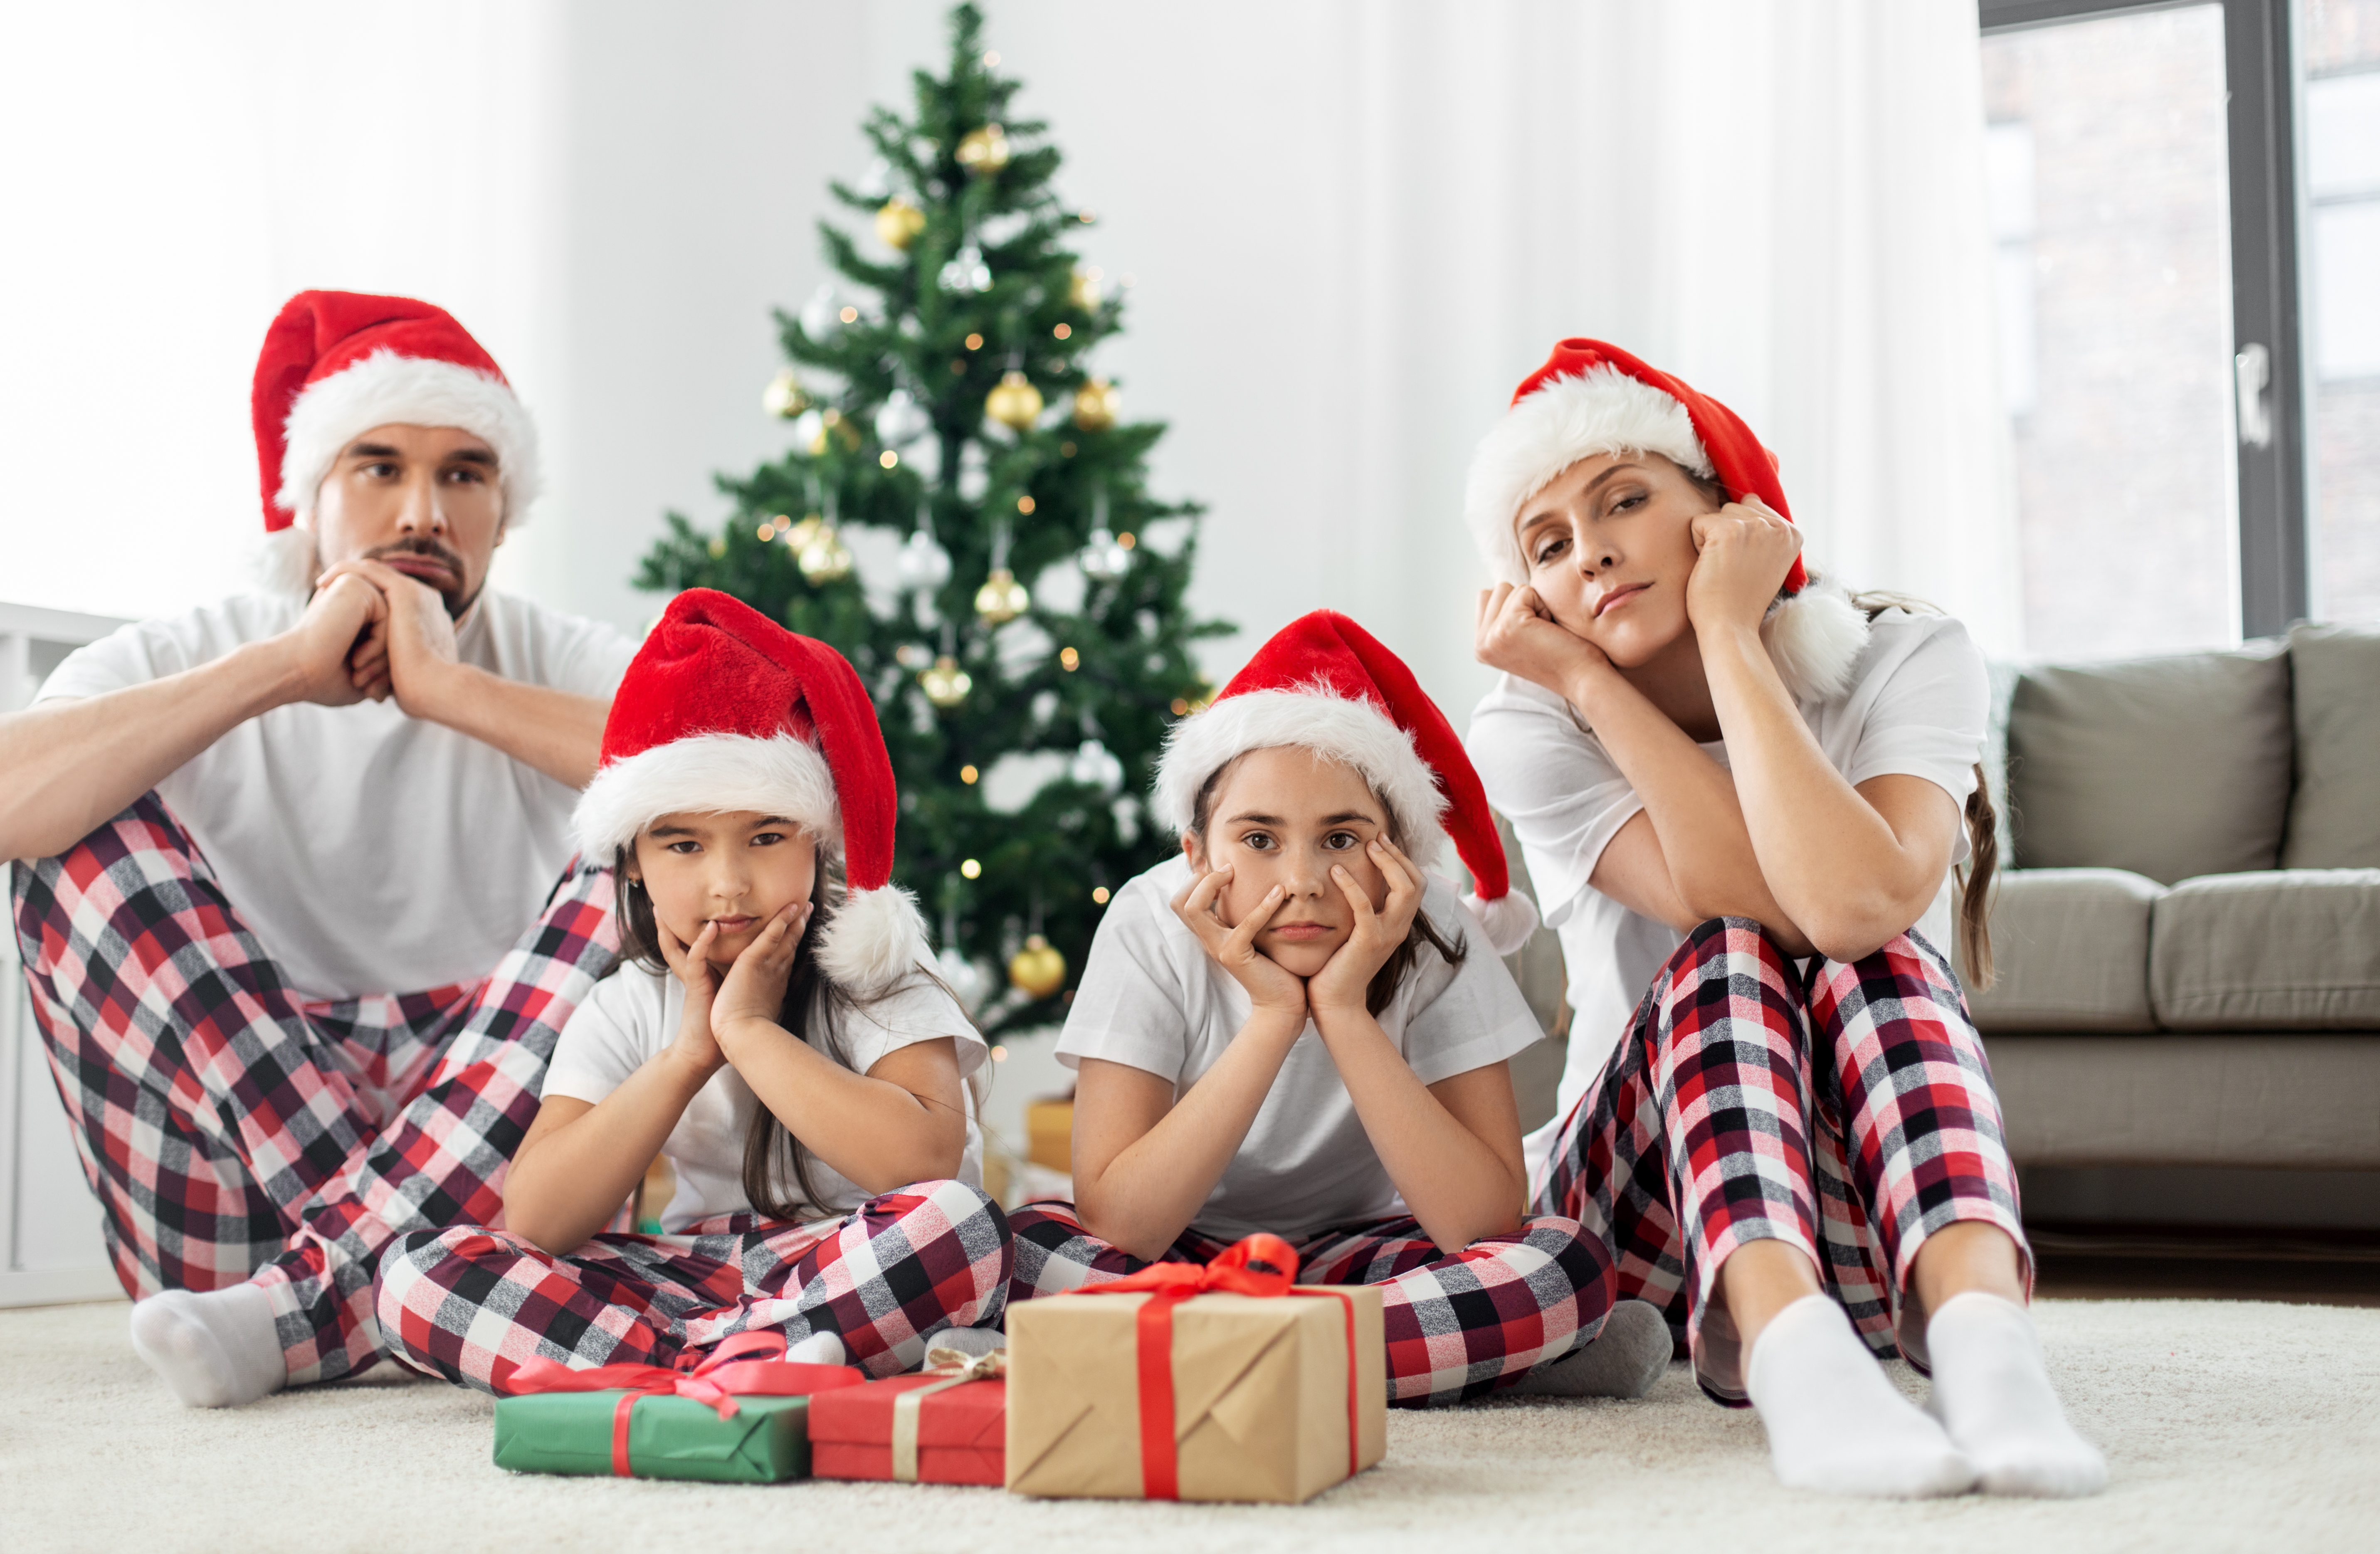 A depressed family of four sitting near a Christmas tree wearing Santa caps | Source: Shutterstock